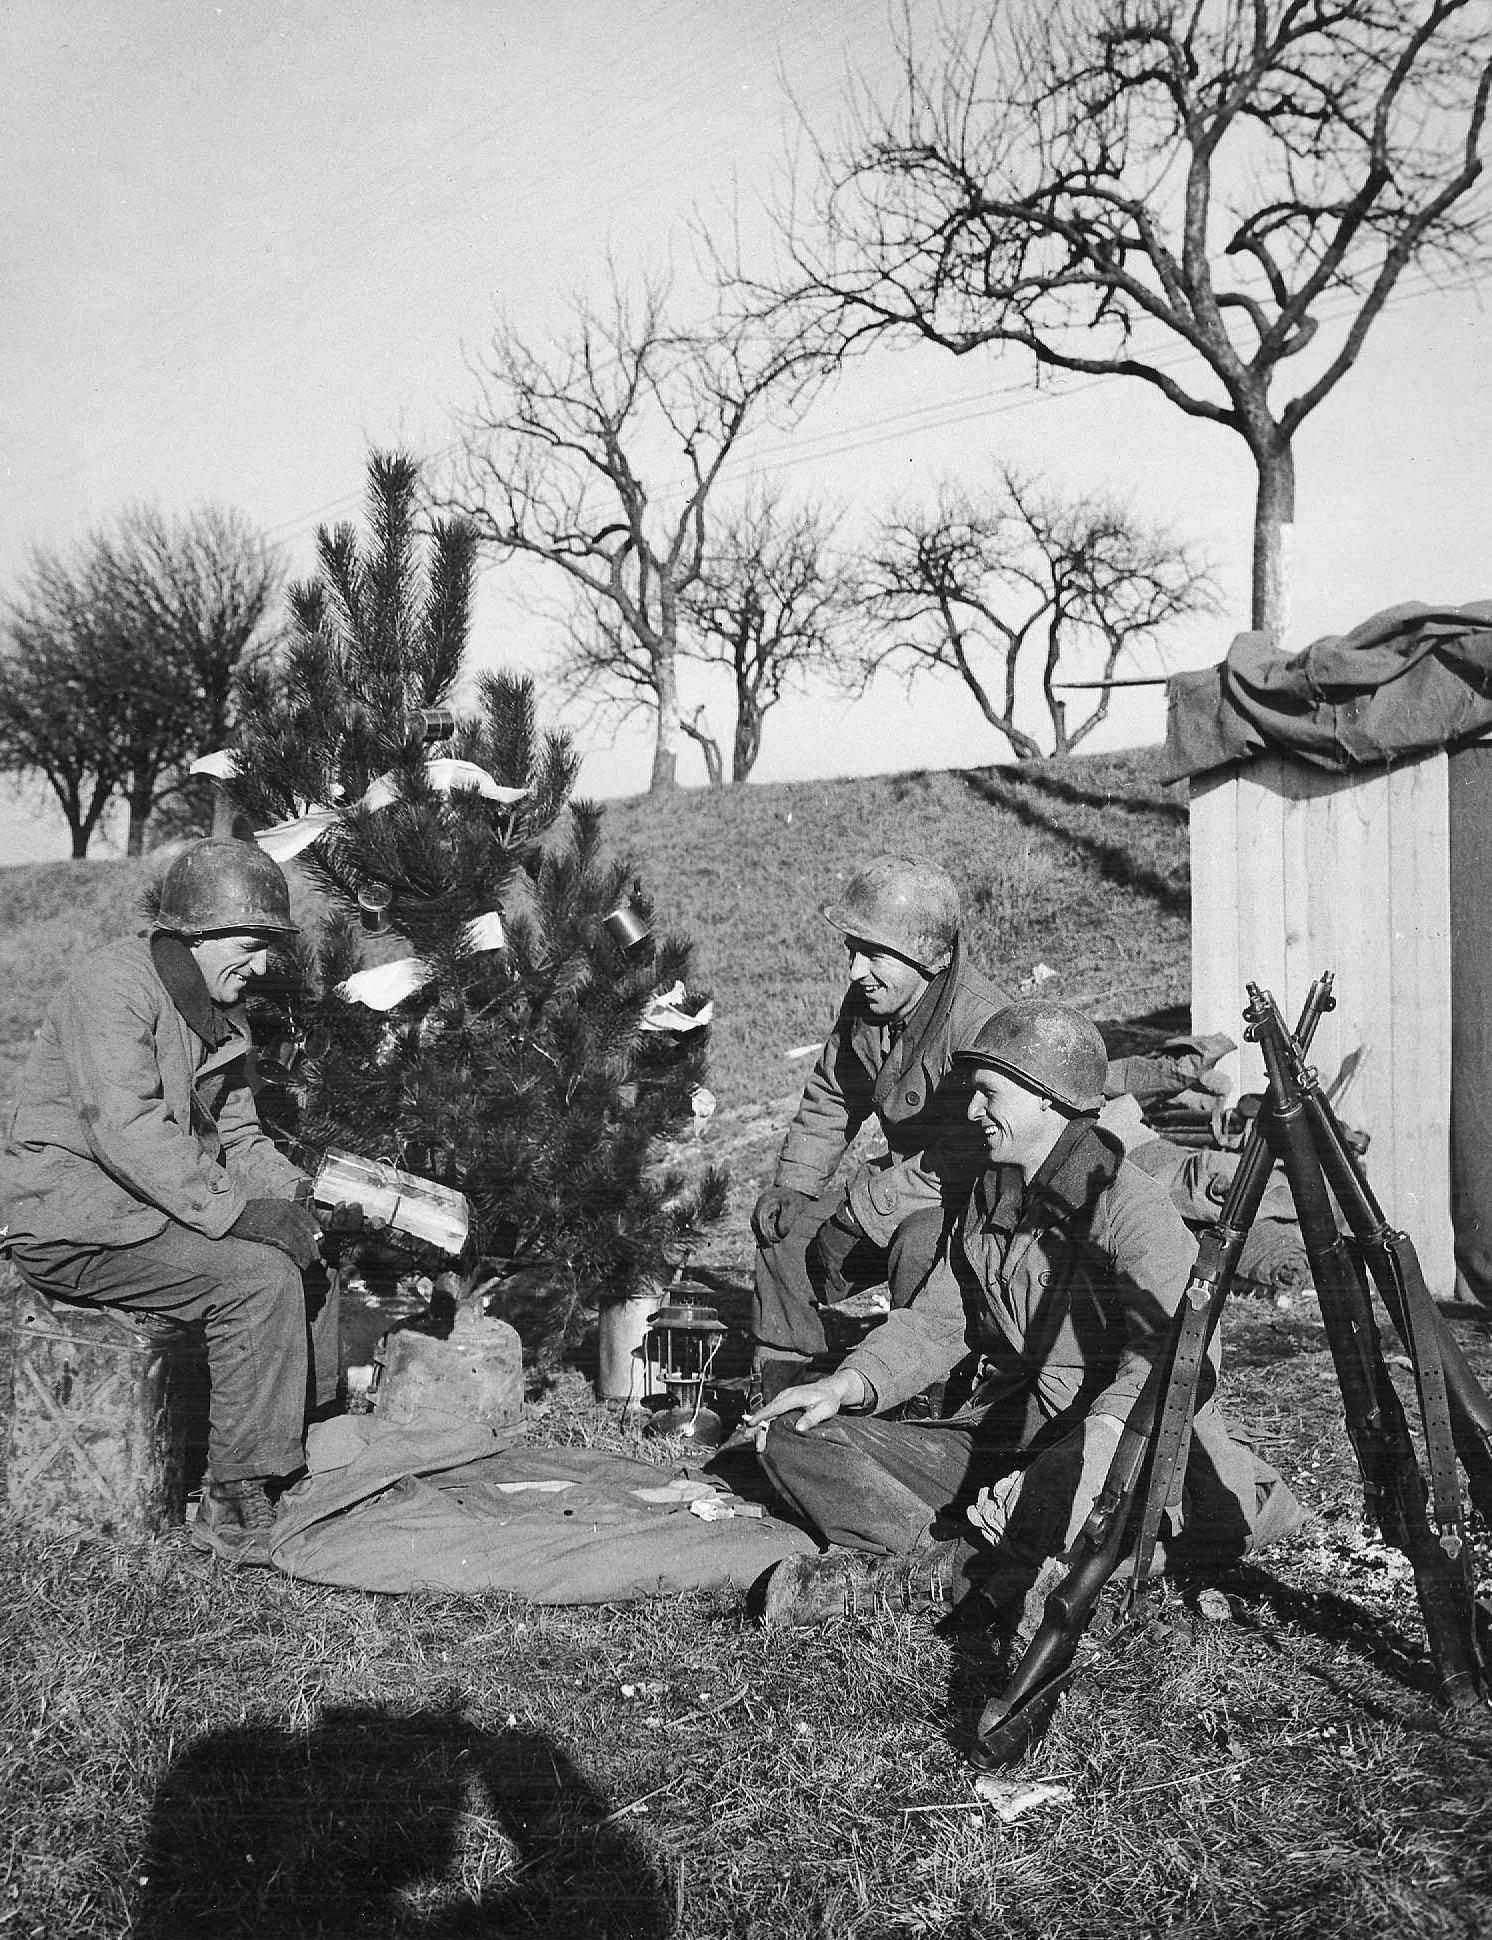 Soldiers of the 463rd Combat Engineers in France near the German border observe Christmas, 25 Dec 1944; note K-ration cans as ornaments (US Army Signal Corps photo)